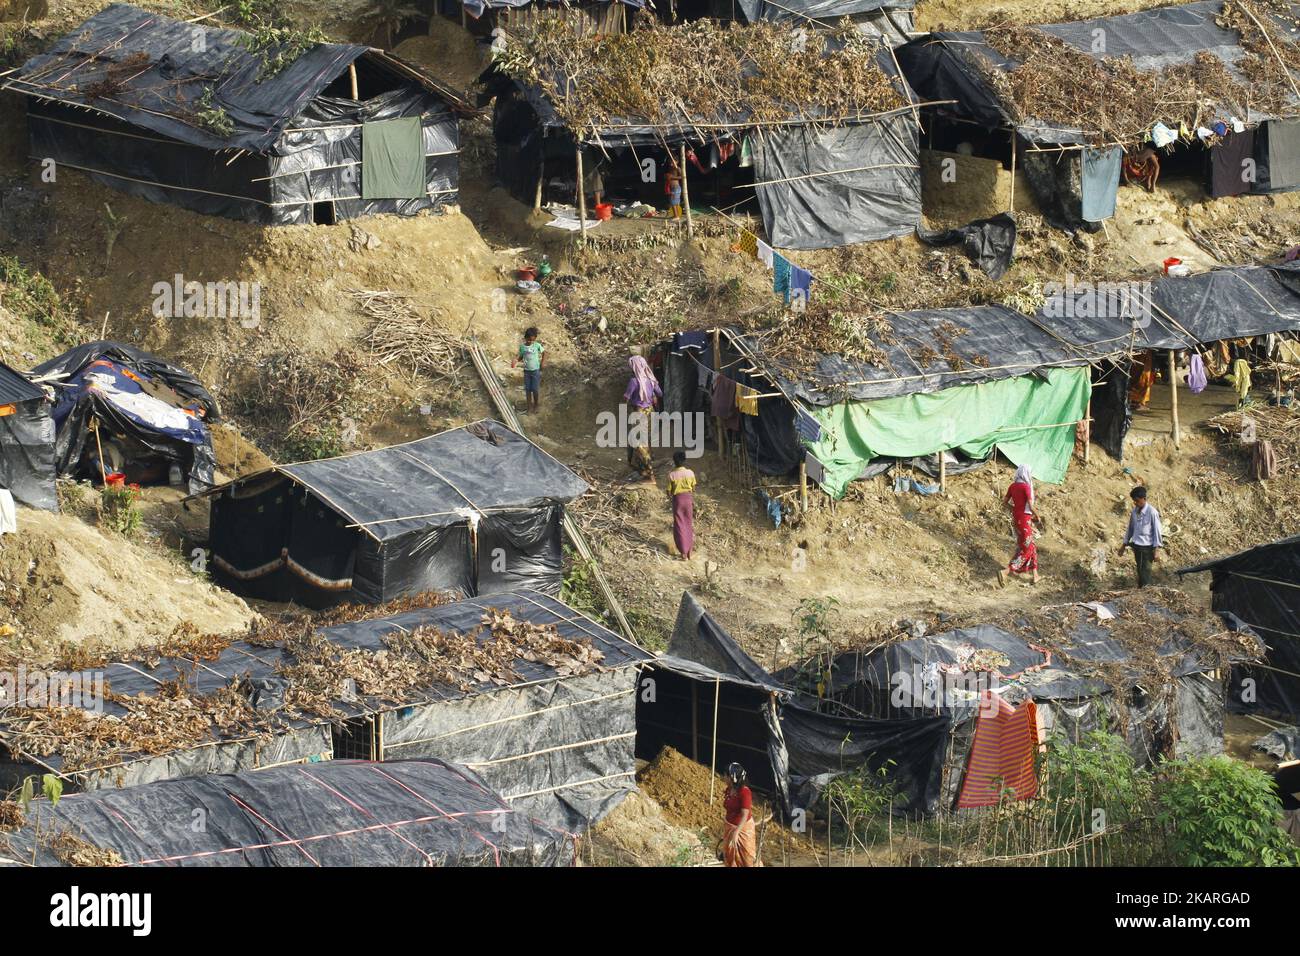 A view shows Rohingya refugees tents in Ukhiya, Bangladesh on September 26, 2017. More than 450,000 Rohingya Muslims have fled into Bangladesh, violence erupted in Myanmar's Rakhine state since August 25. (Photo by Rehman Asad/NurPhoto) Stock Photo